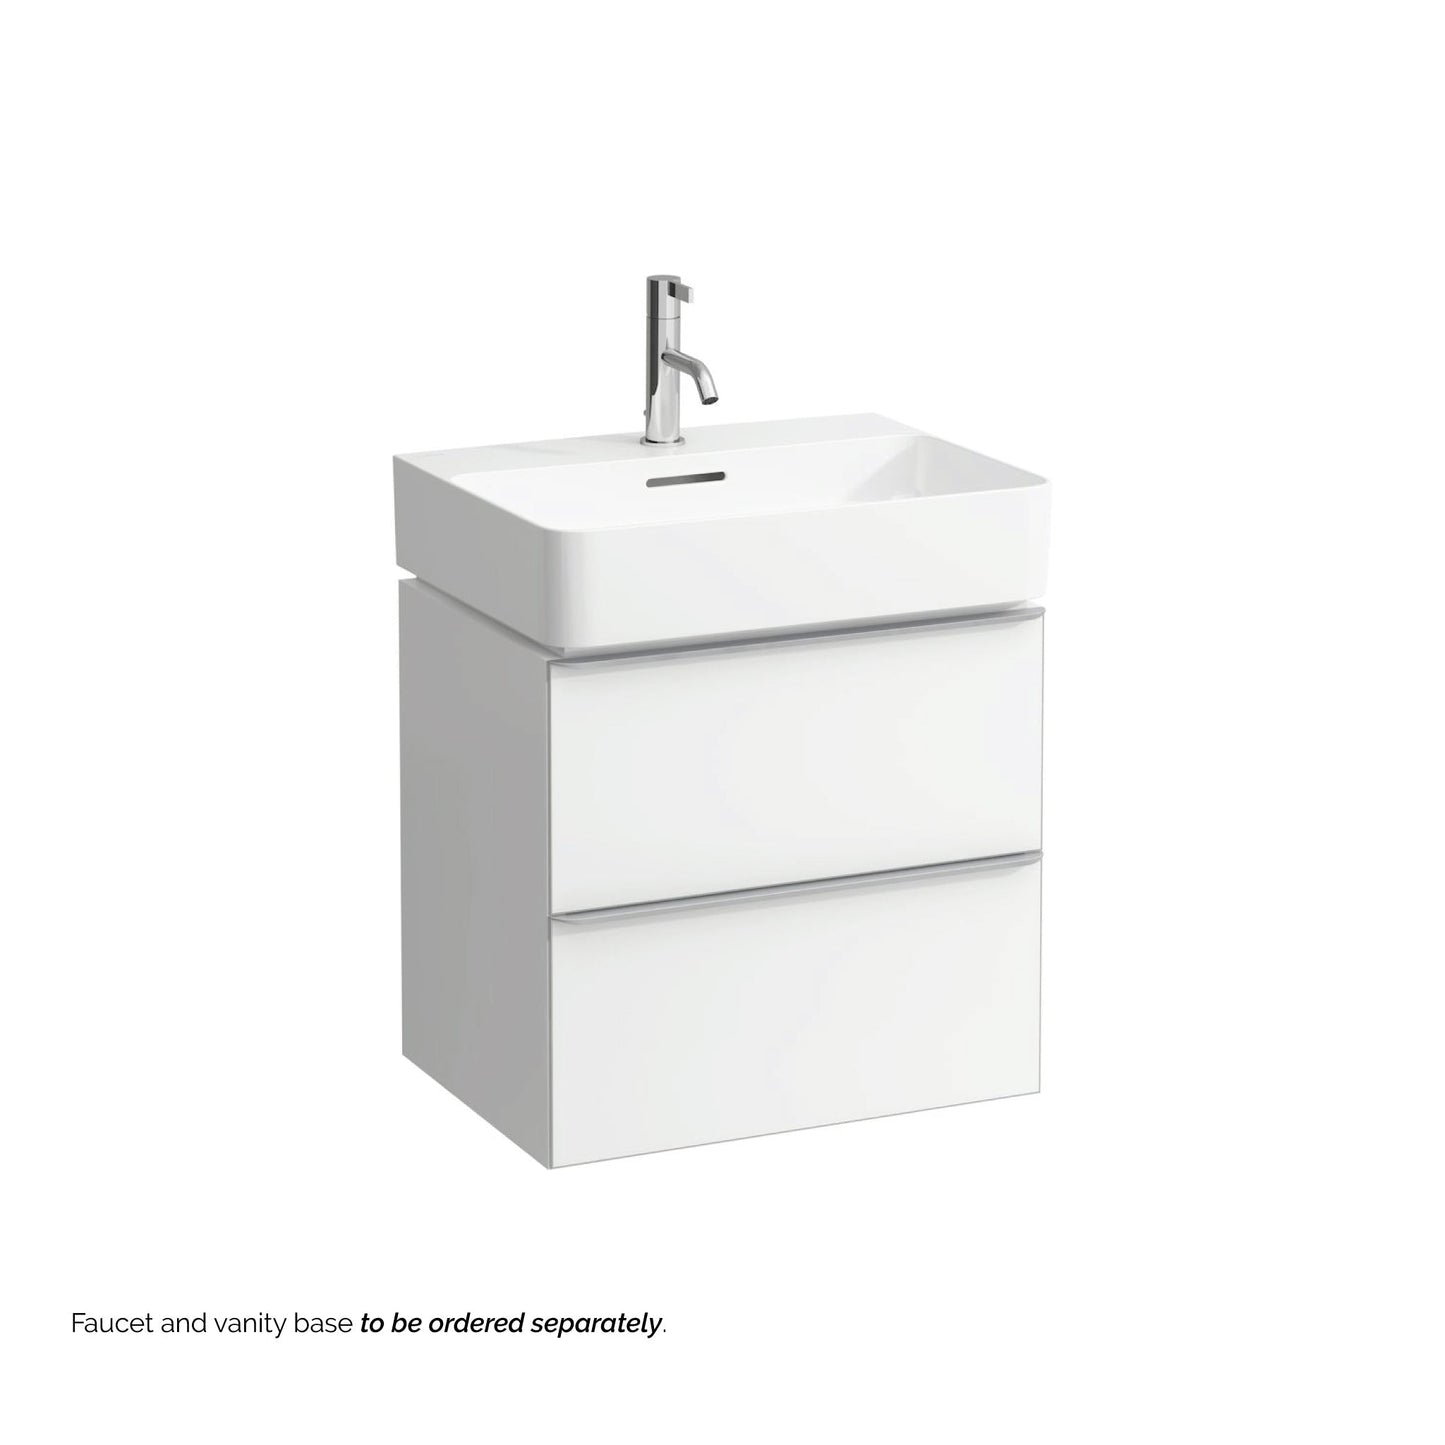 Laufen Val 22" x 17" Matte White Ceramic Wall-Mounted Bathroom Sink With Faucet Hole